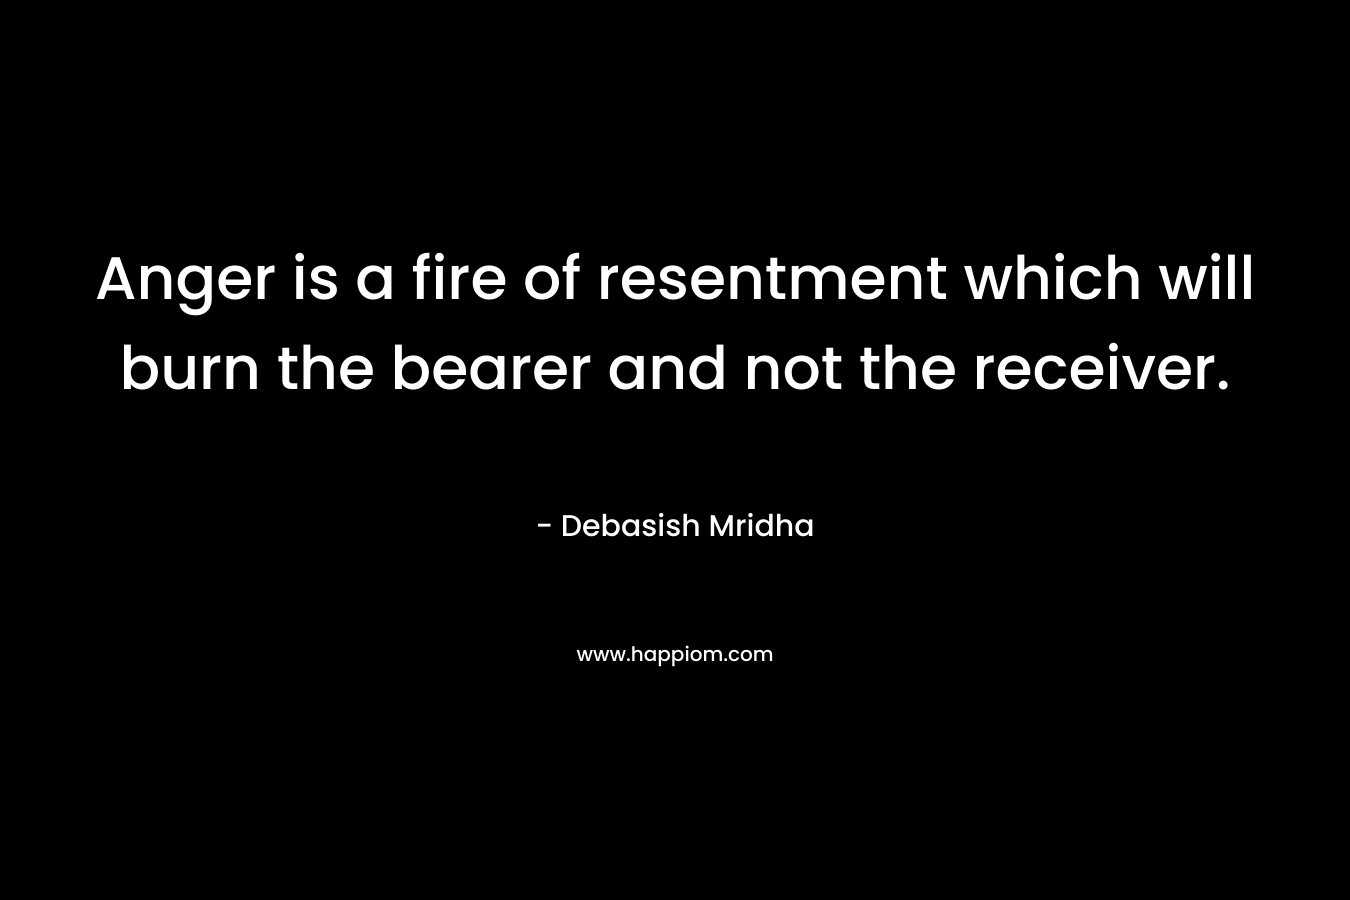 Anger is a fire of resentment which will burn the bearer and not the receiver.